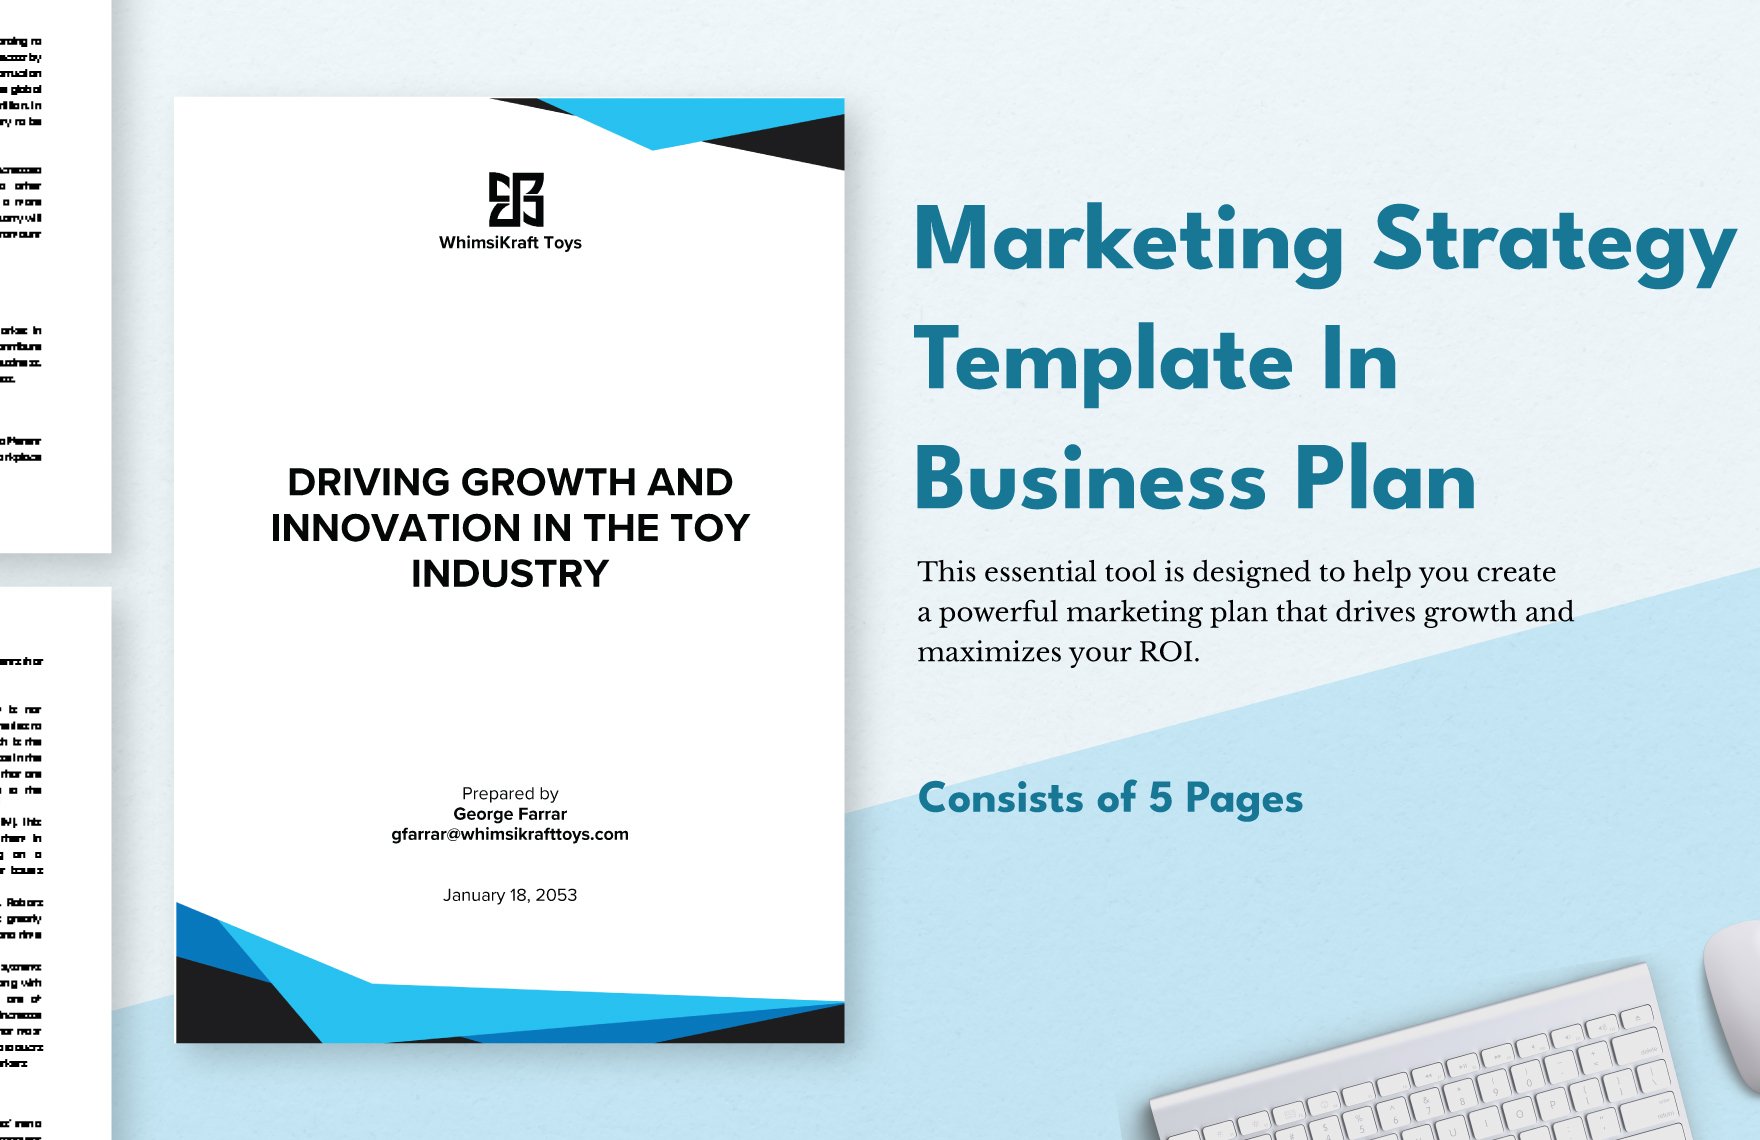 Marketing Strategy Template In Business Plan